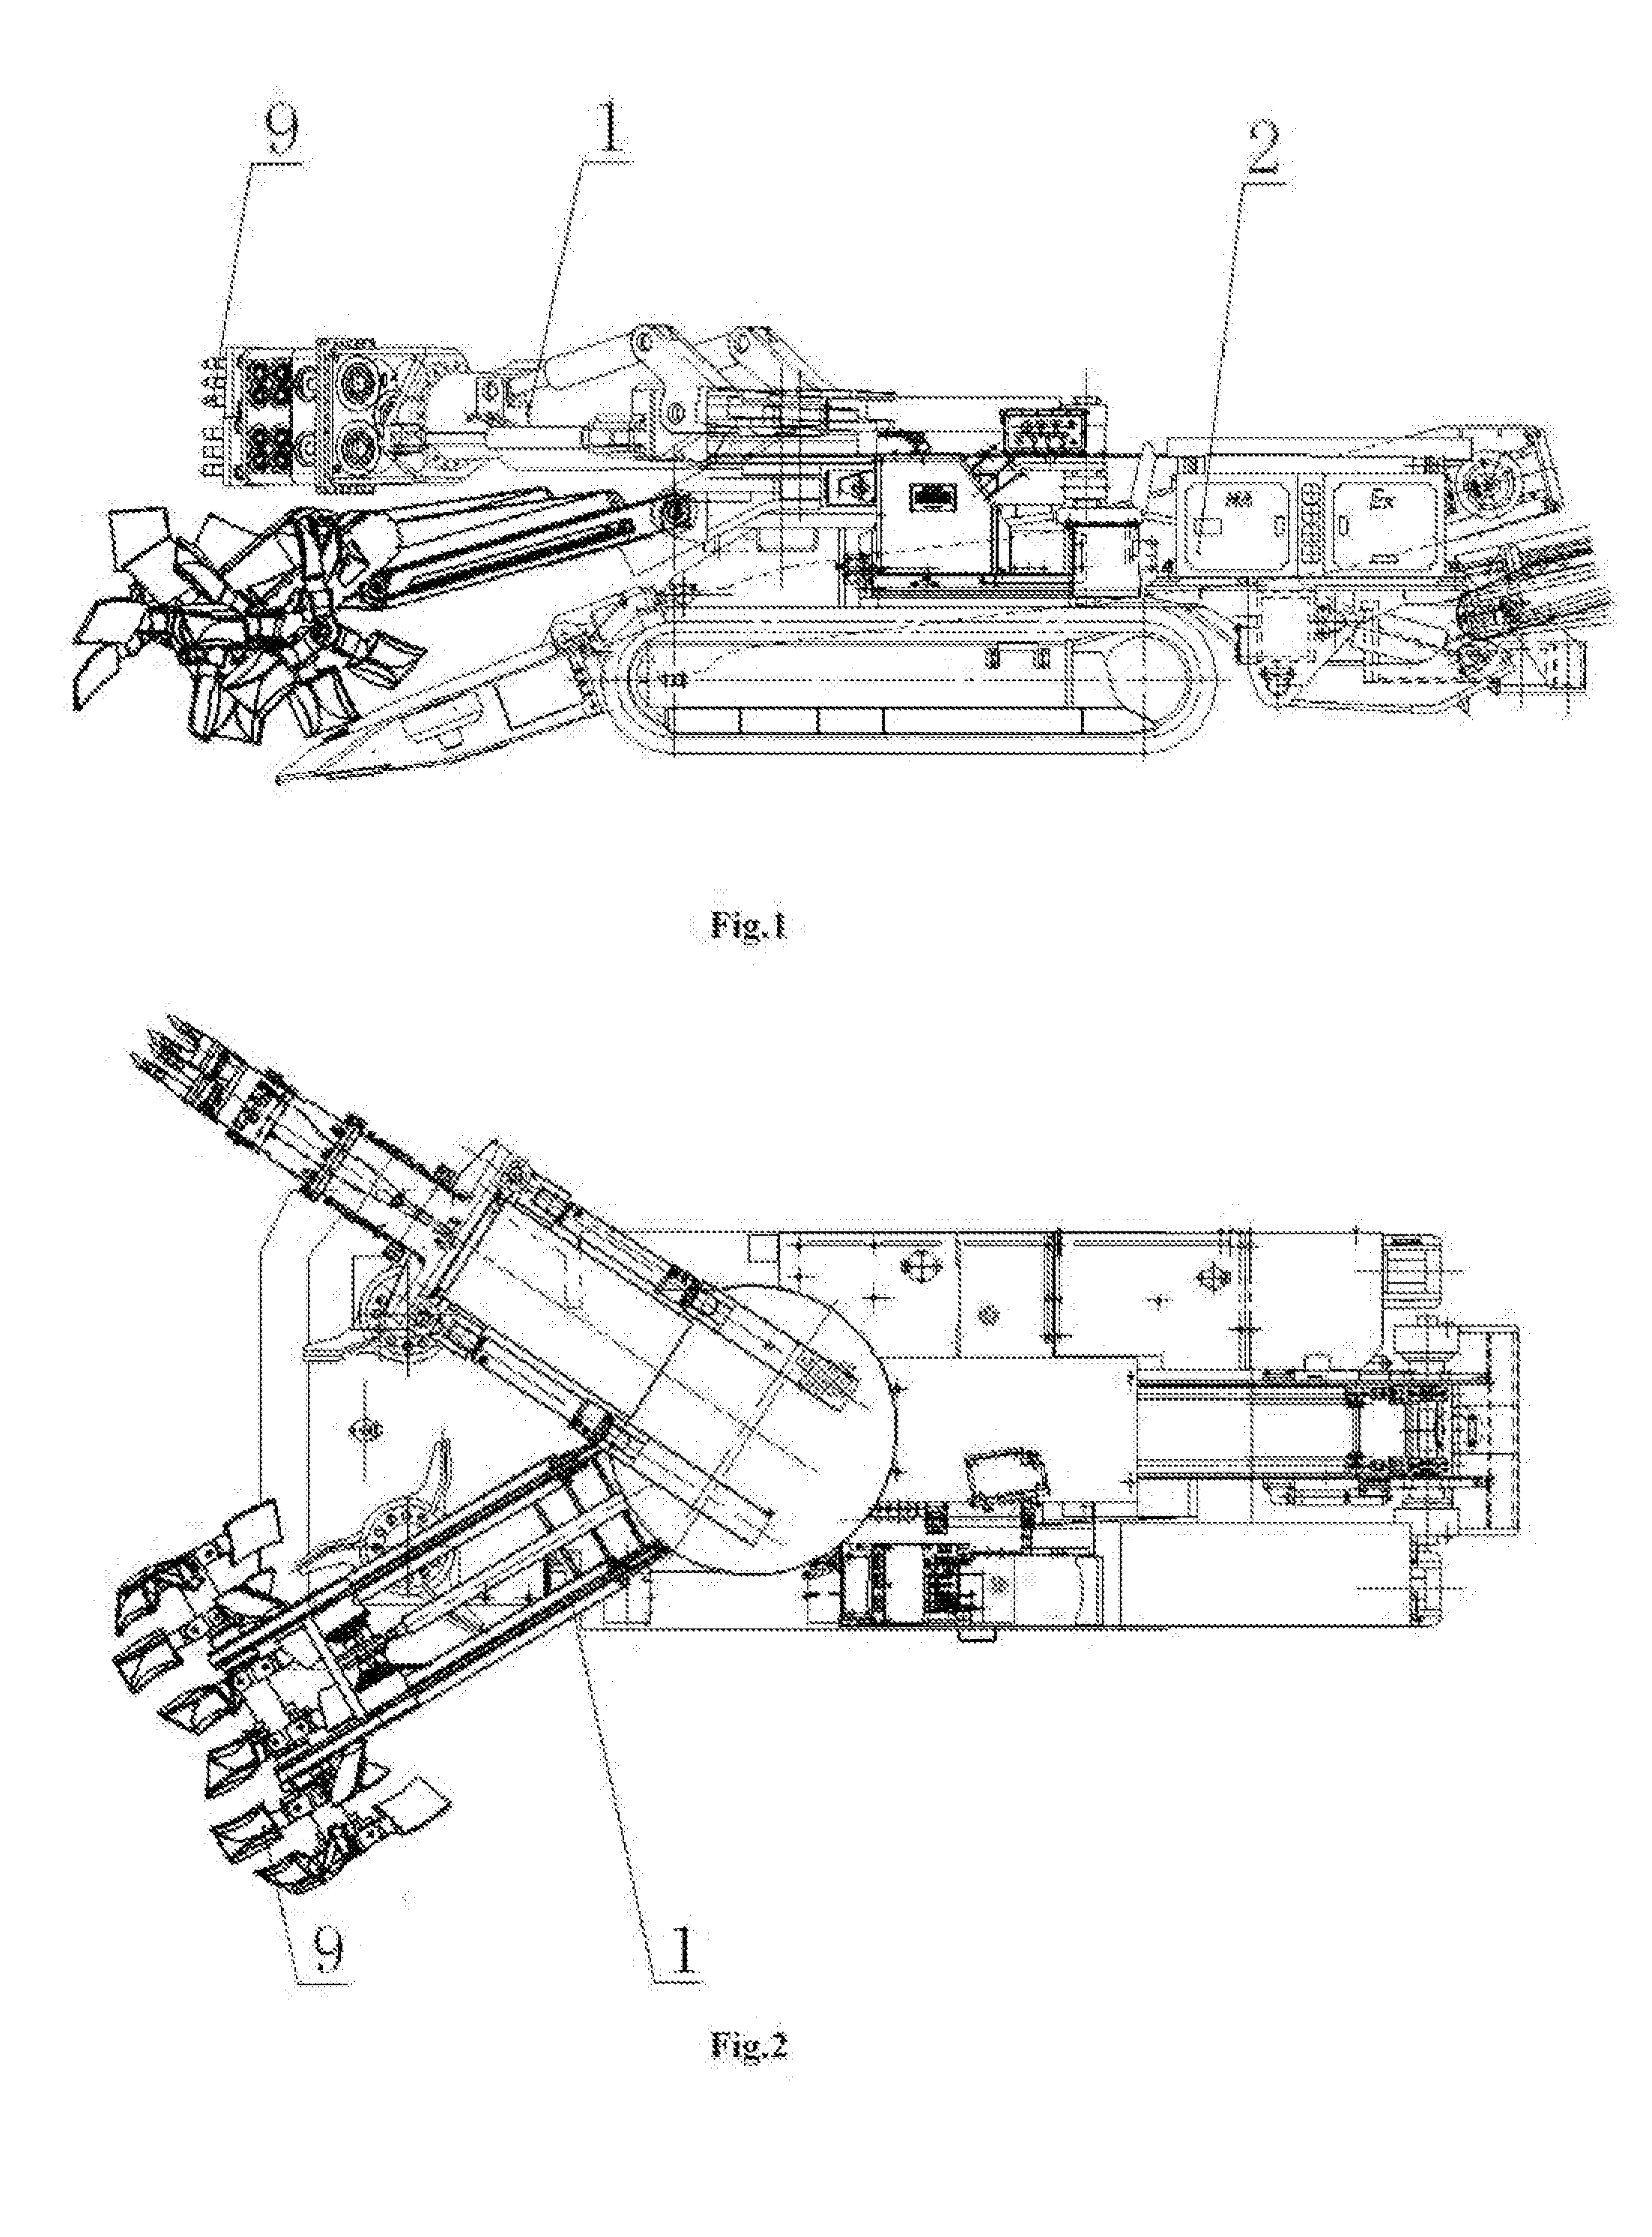 Method for arranging rolling-friction stretching and retraction based rolling stroke sections of a rocker arm in parallel, and an excavator or loader comprising a rocker arm having rolling stroke sections arranged in parallel